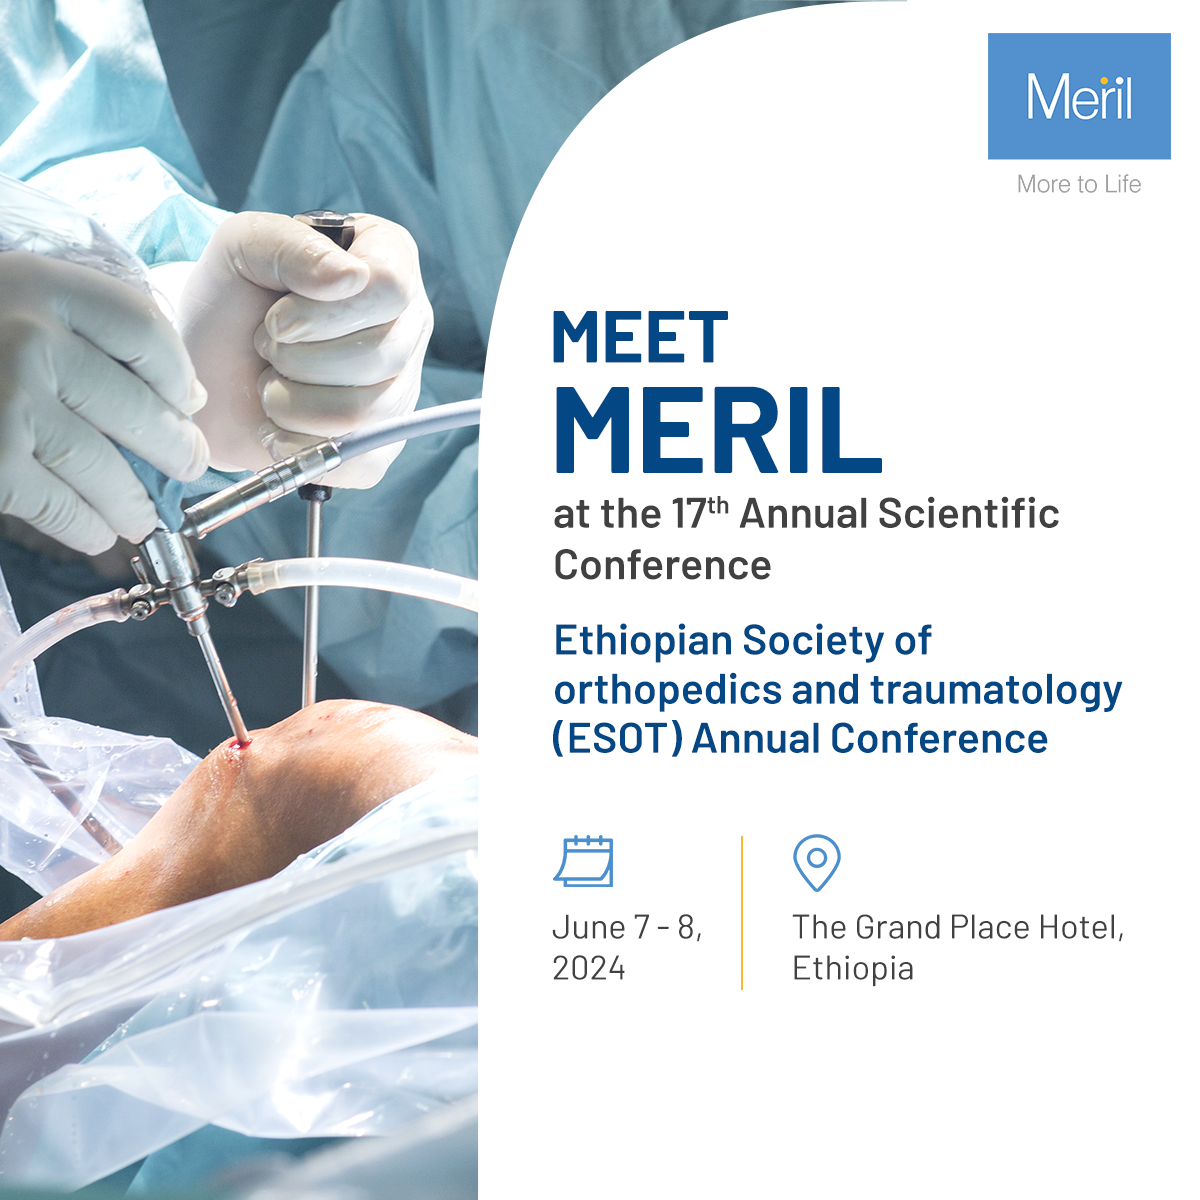  Join Meril at the 17th Annual Scientific Conference by the Ethiopian Society of Orthopedics and Traumatology (ESOT)